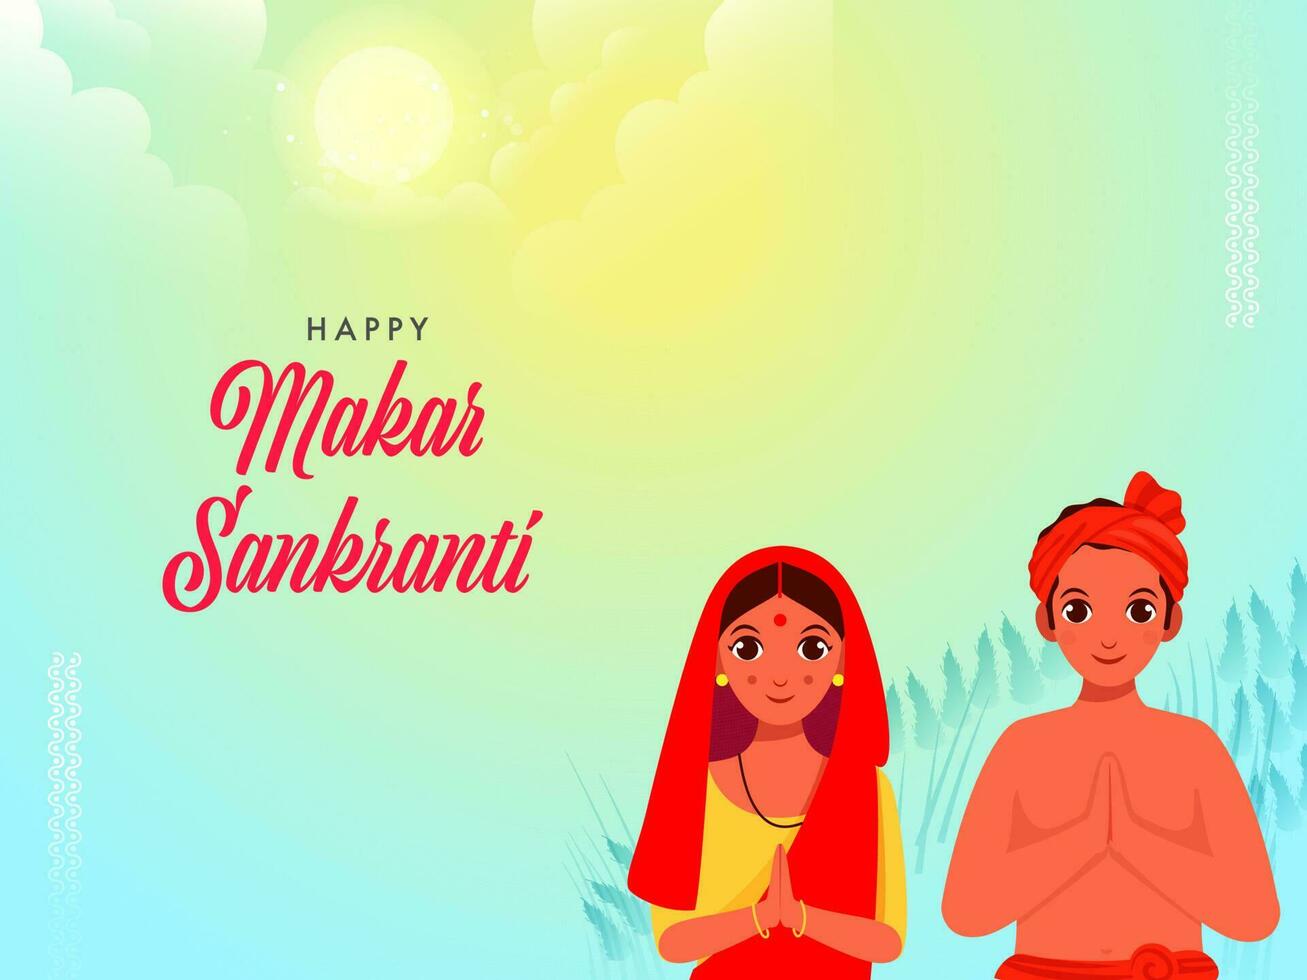 Happy Makar Sankranti Font With Hindu Couple Praying To Surya On Gradient Yellow And Blue Background. vector